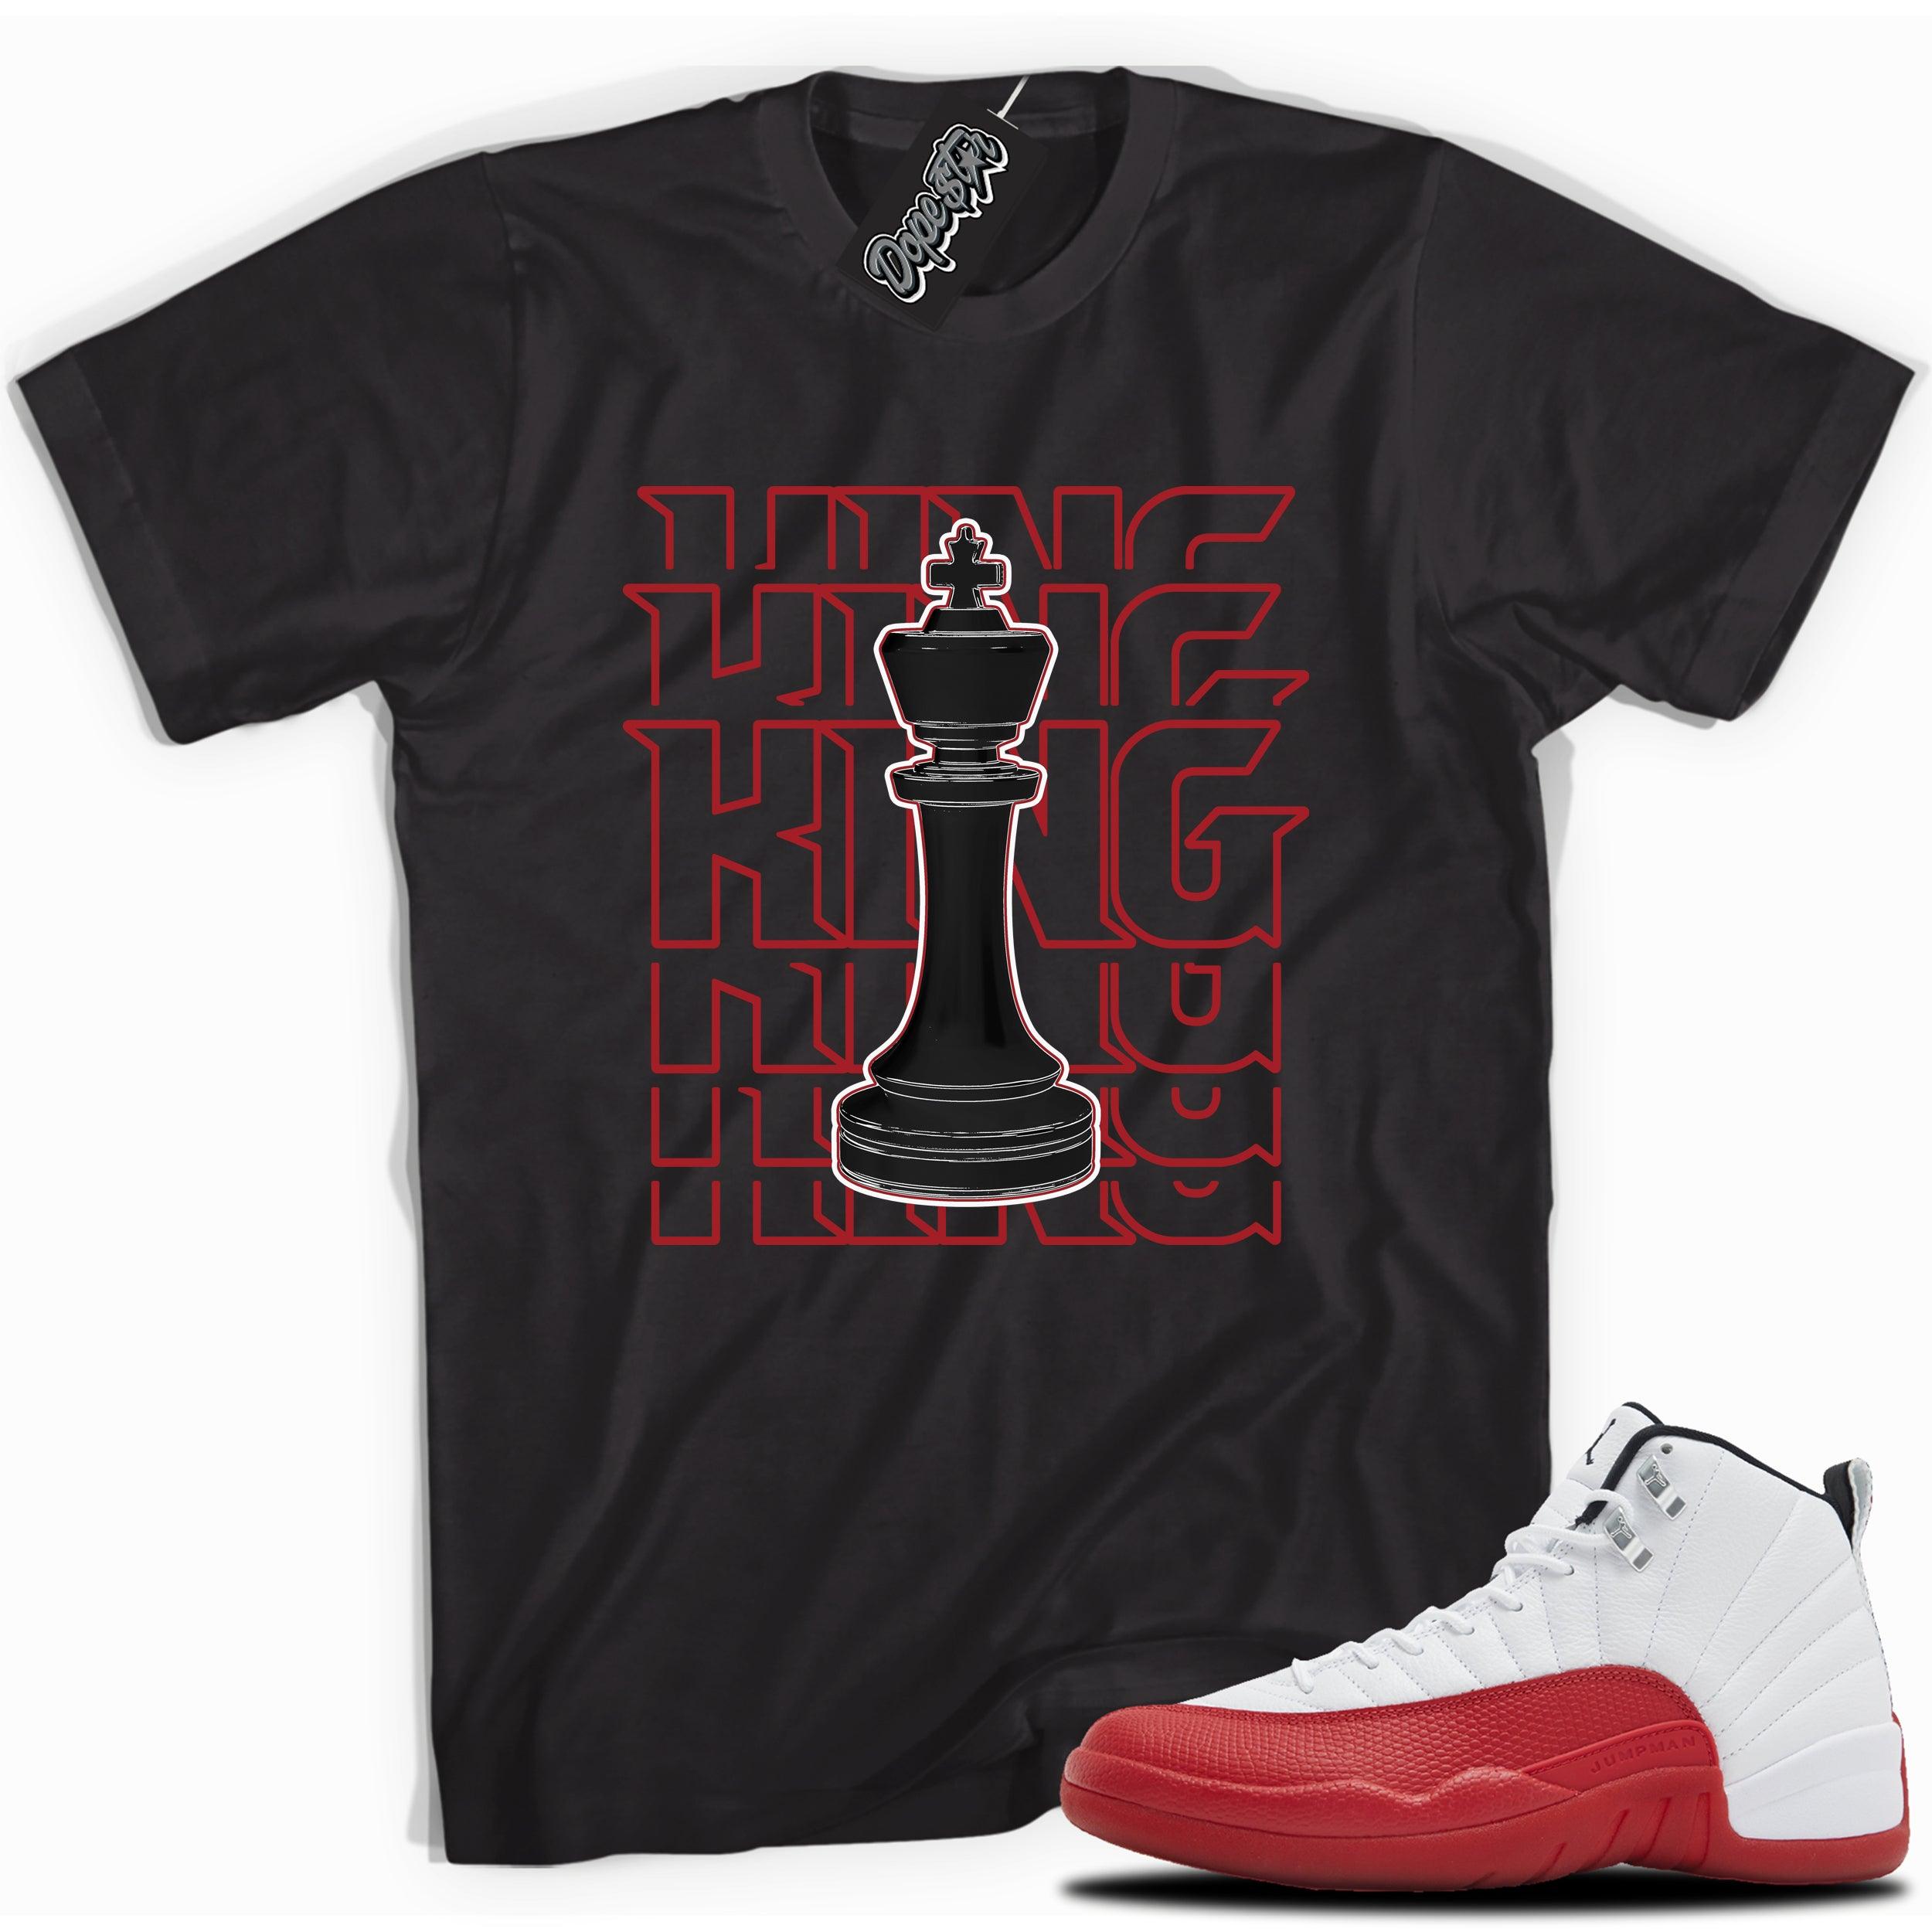 Cool Black graphic tee with “  KING CHESS  ” print, that perfectly matches Air Jordan 12 Retro Cherry Red 2023 red and white sneakers 